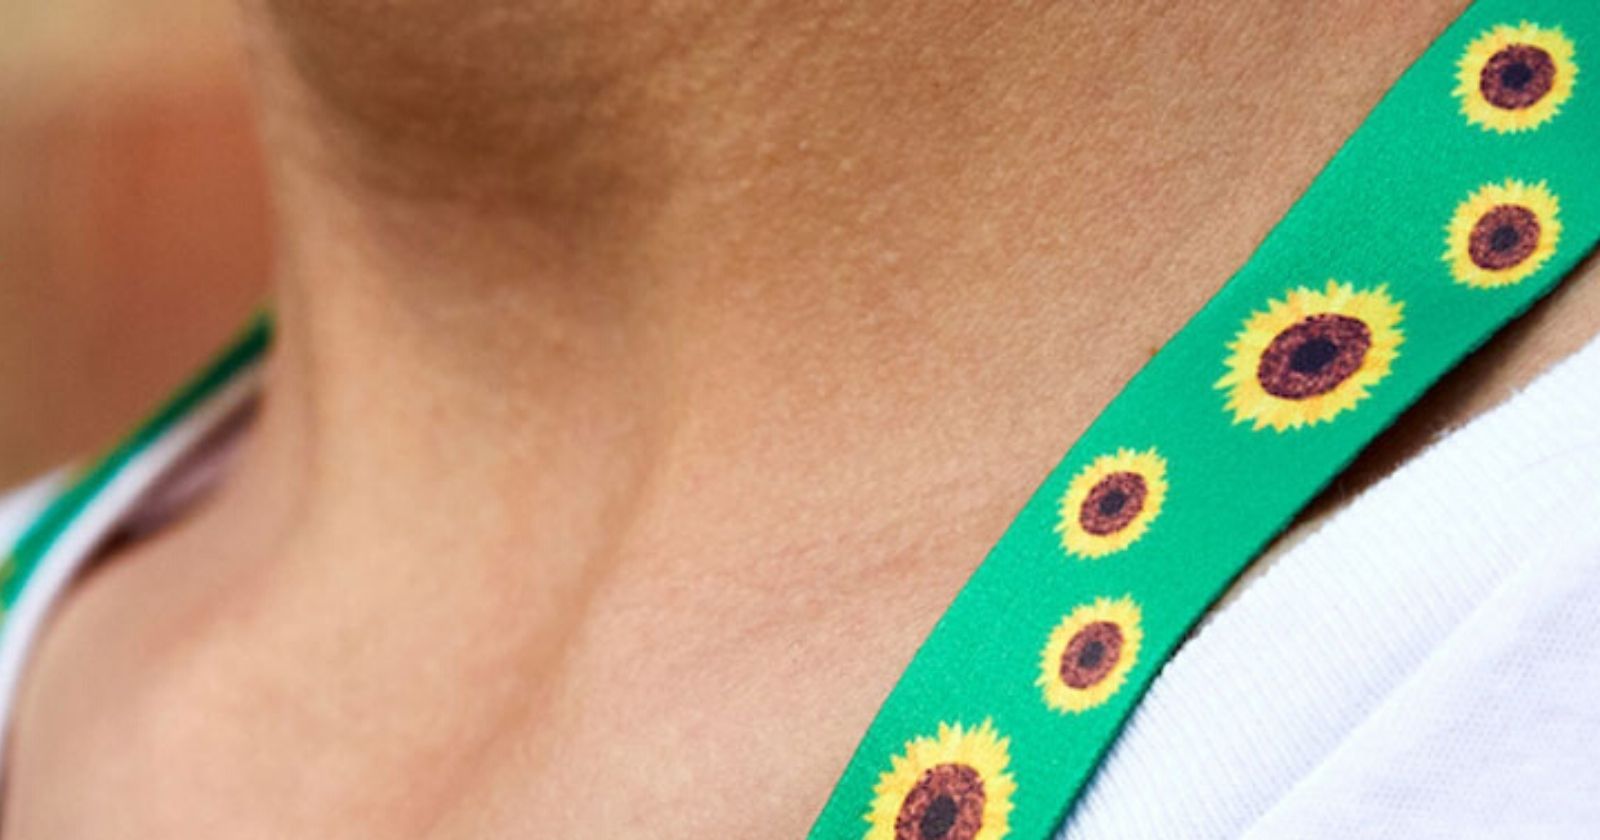 If you come across someone wearing a sunflower necklace, here's how to respond